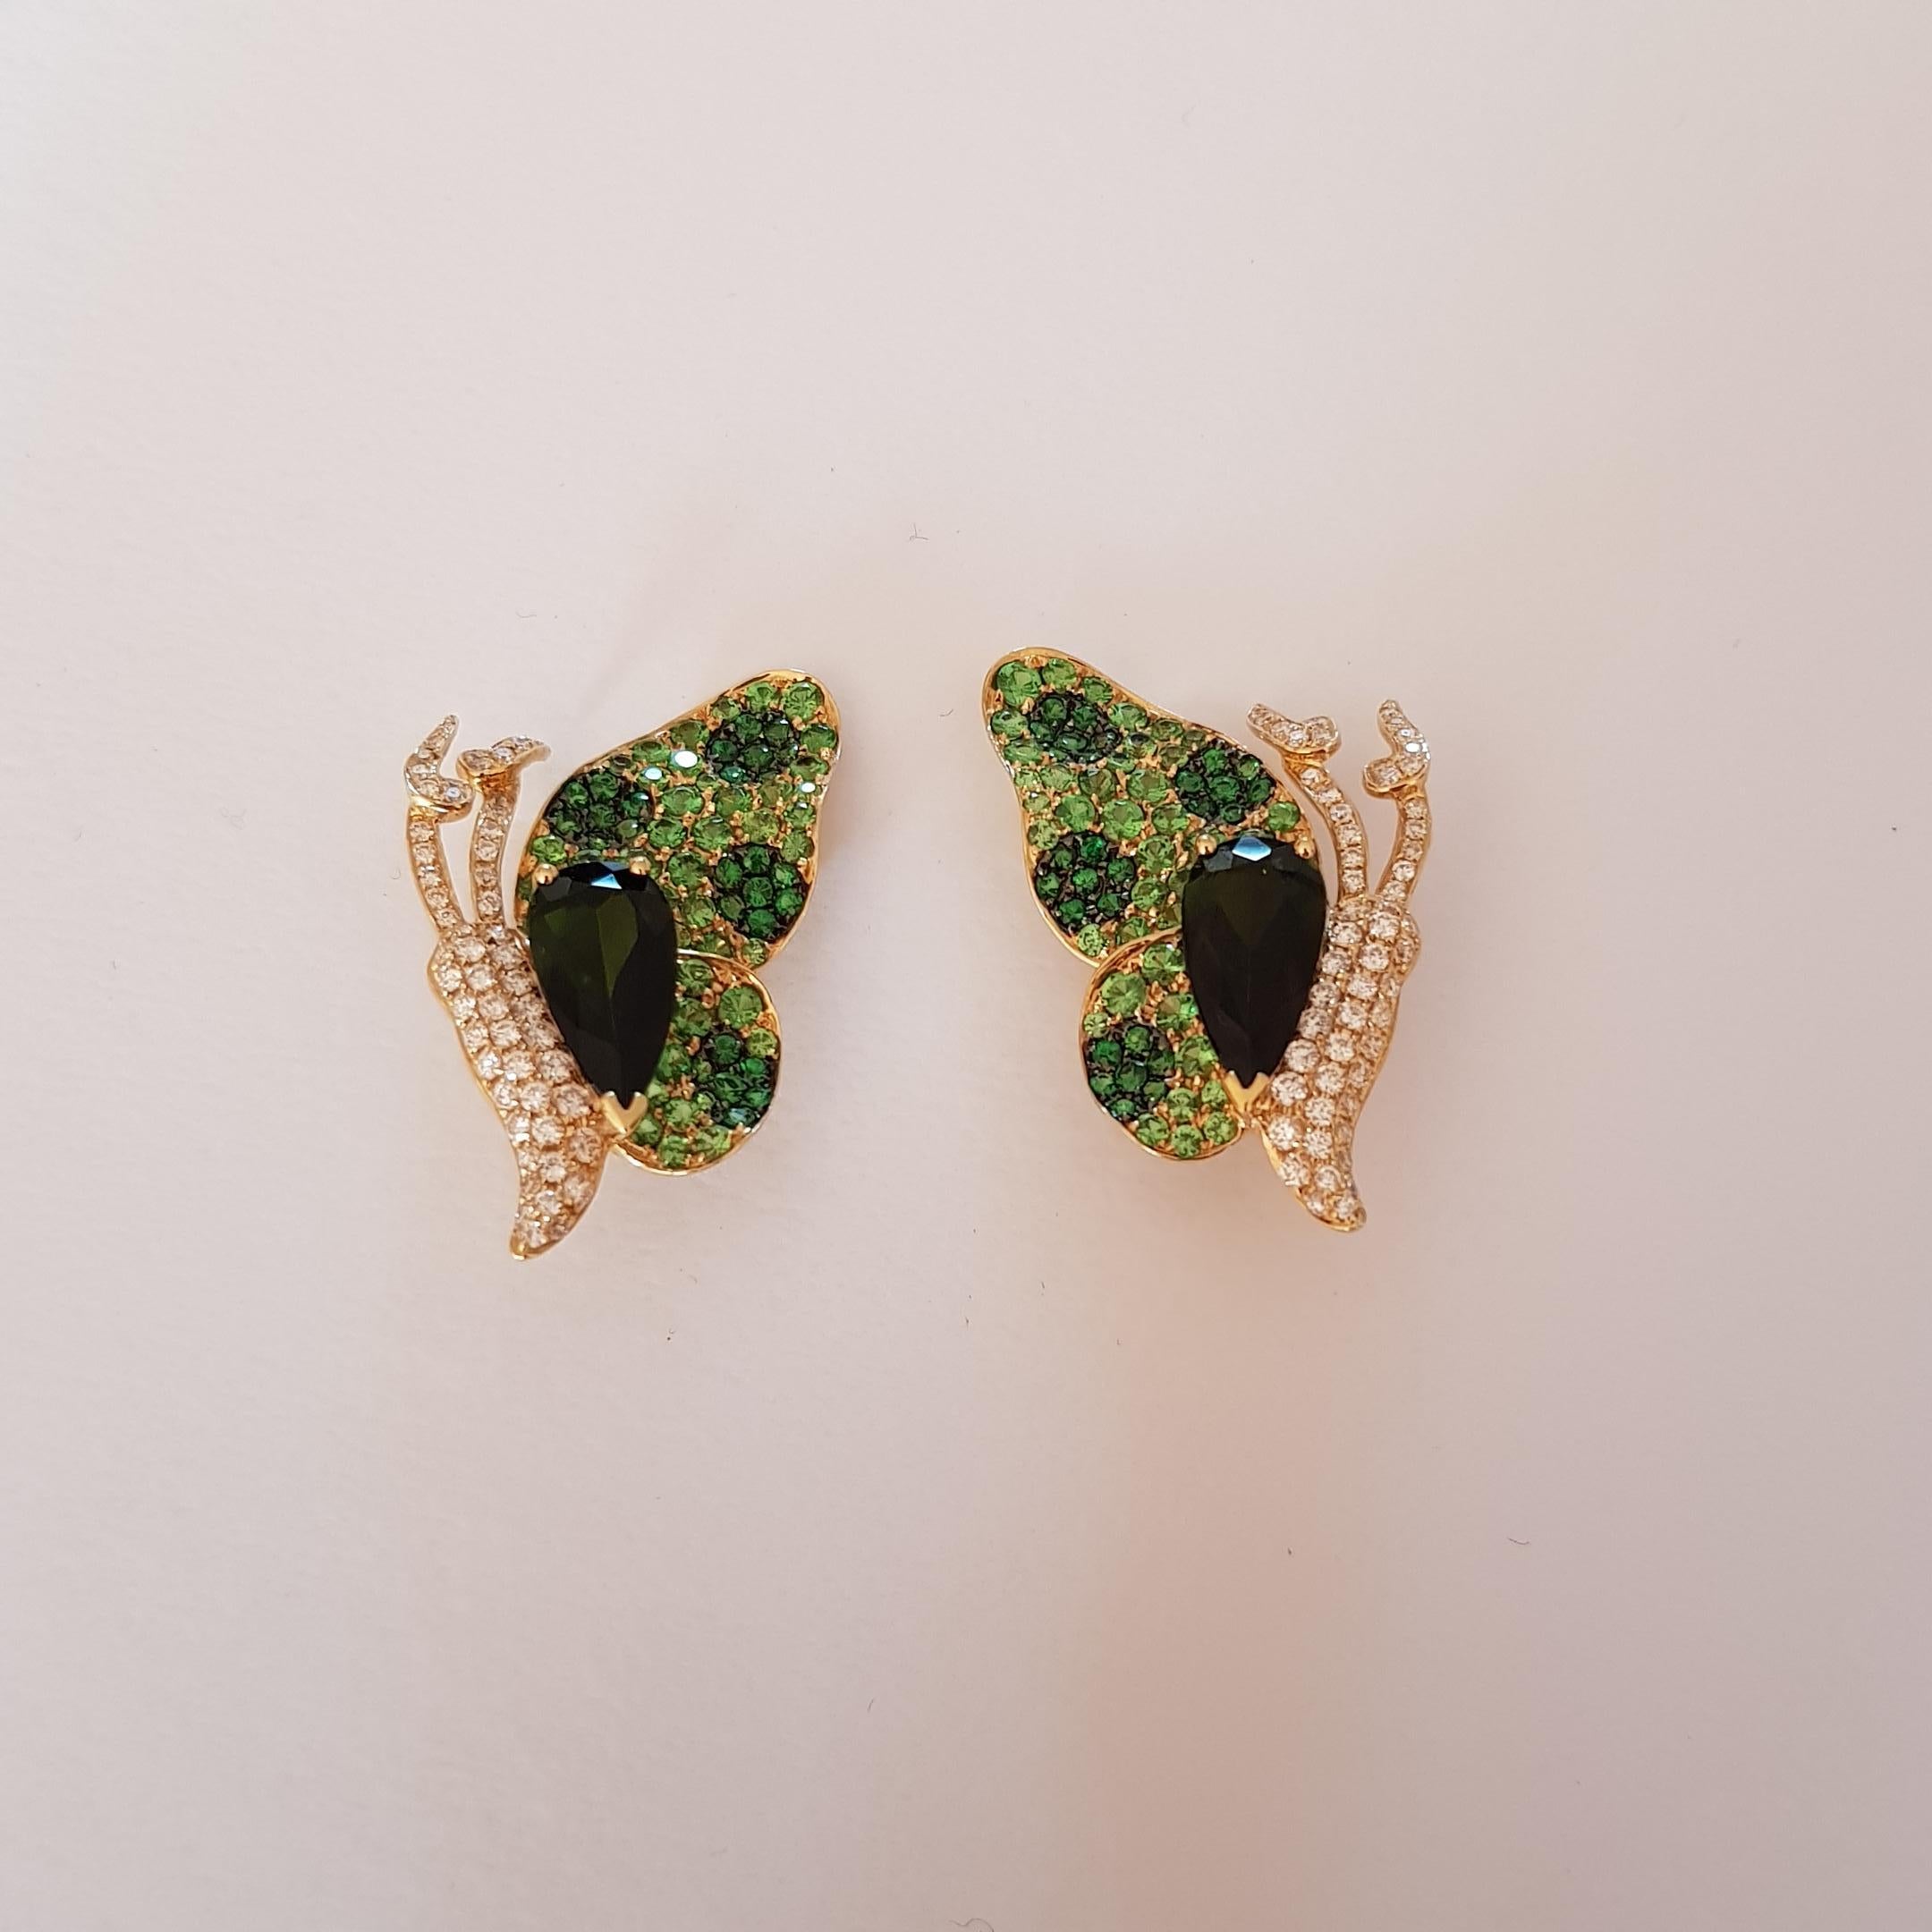 The earrings are set in 18KT yellow gold embellished by 0,69 carats of diamonds and 5,67 carats of tzavorite and tourmaline